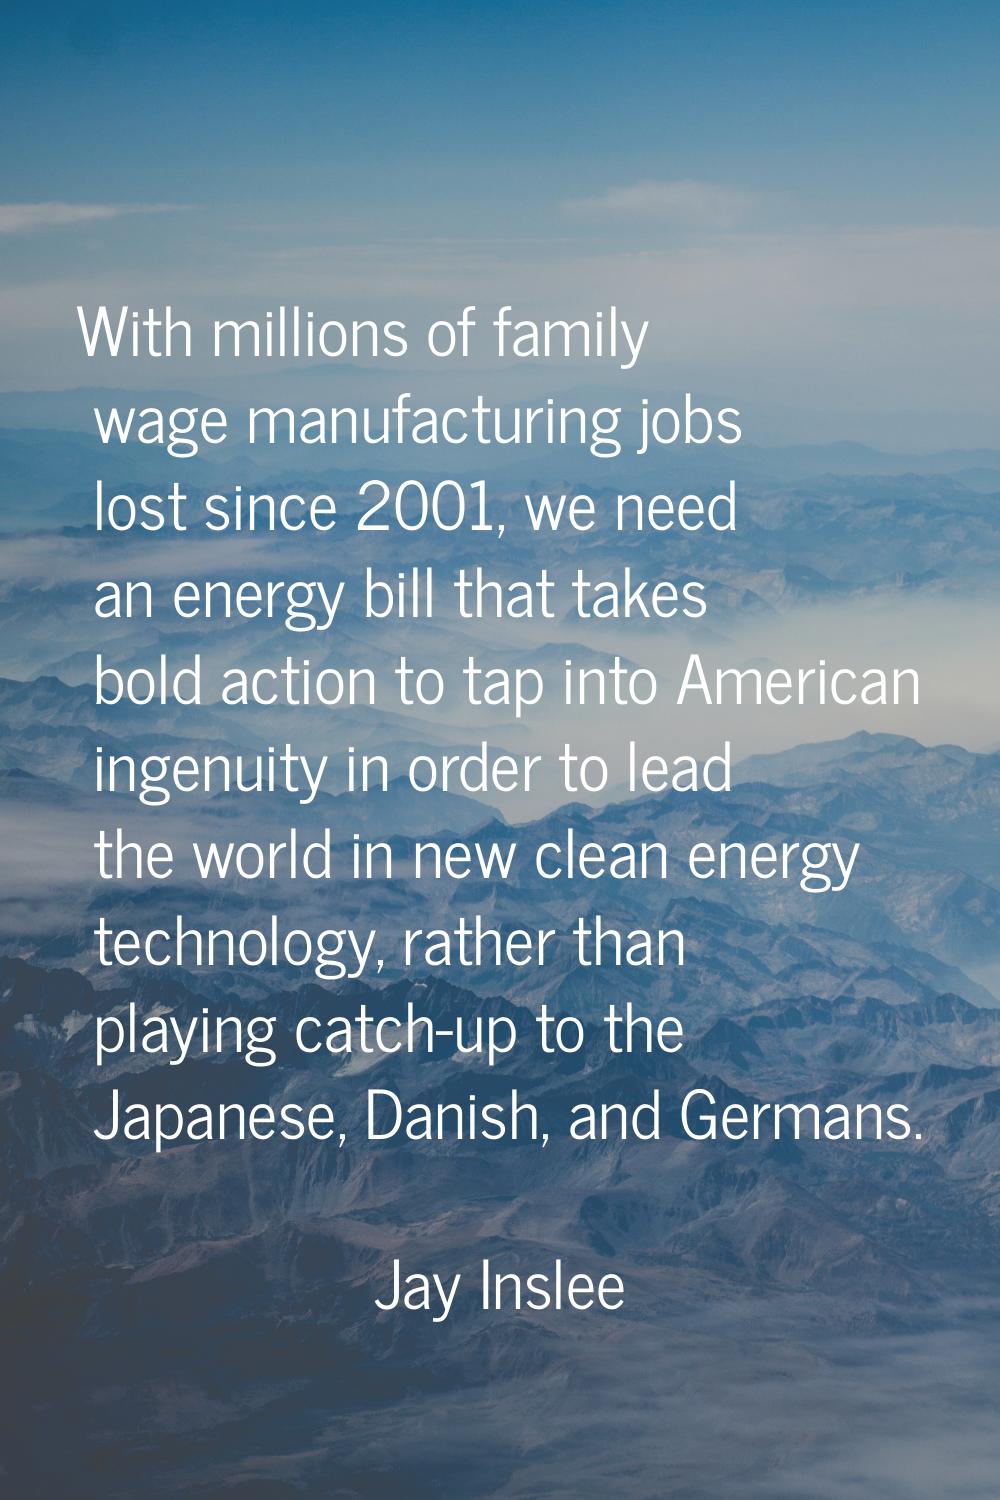 With millions of family wage manufacturing jobs lost since 2001, we need an energy bill that takes 